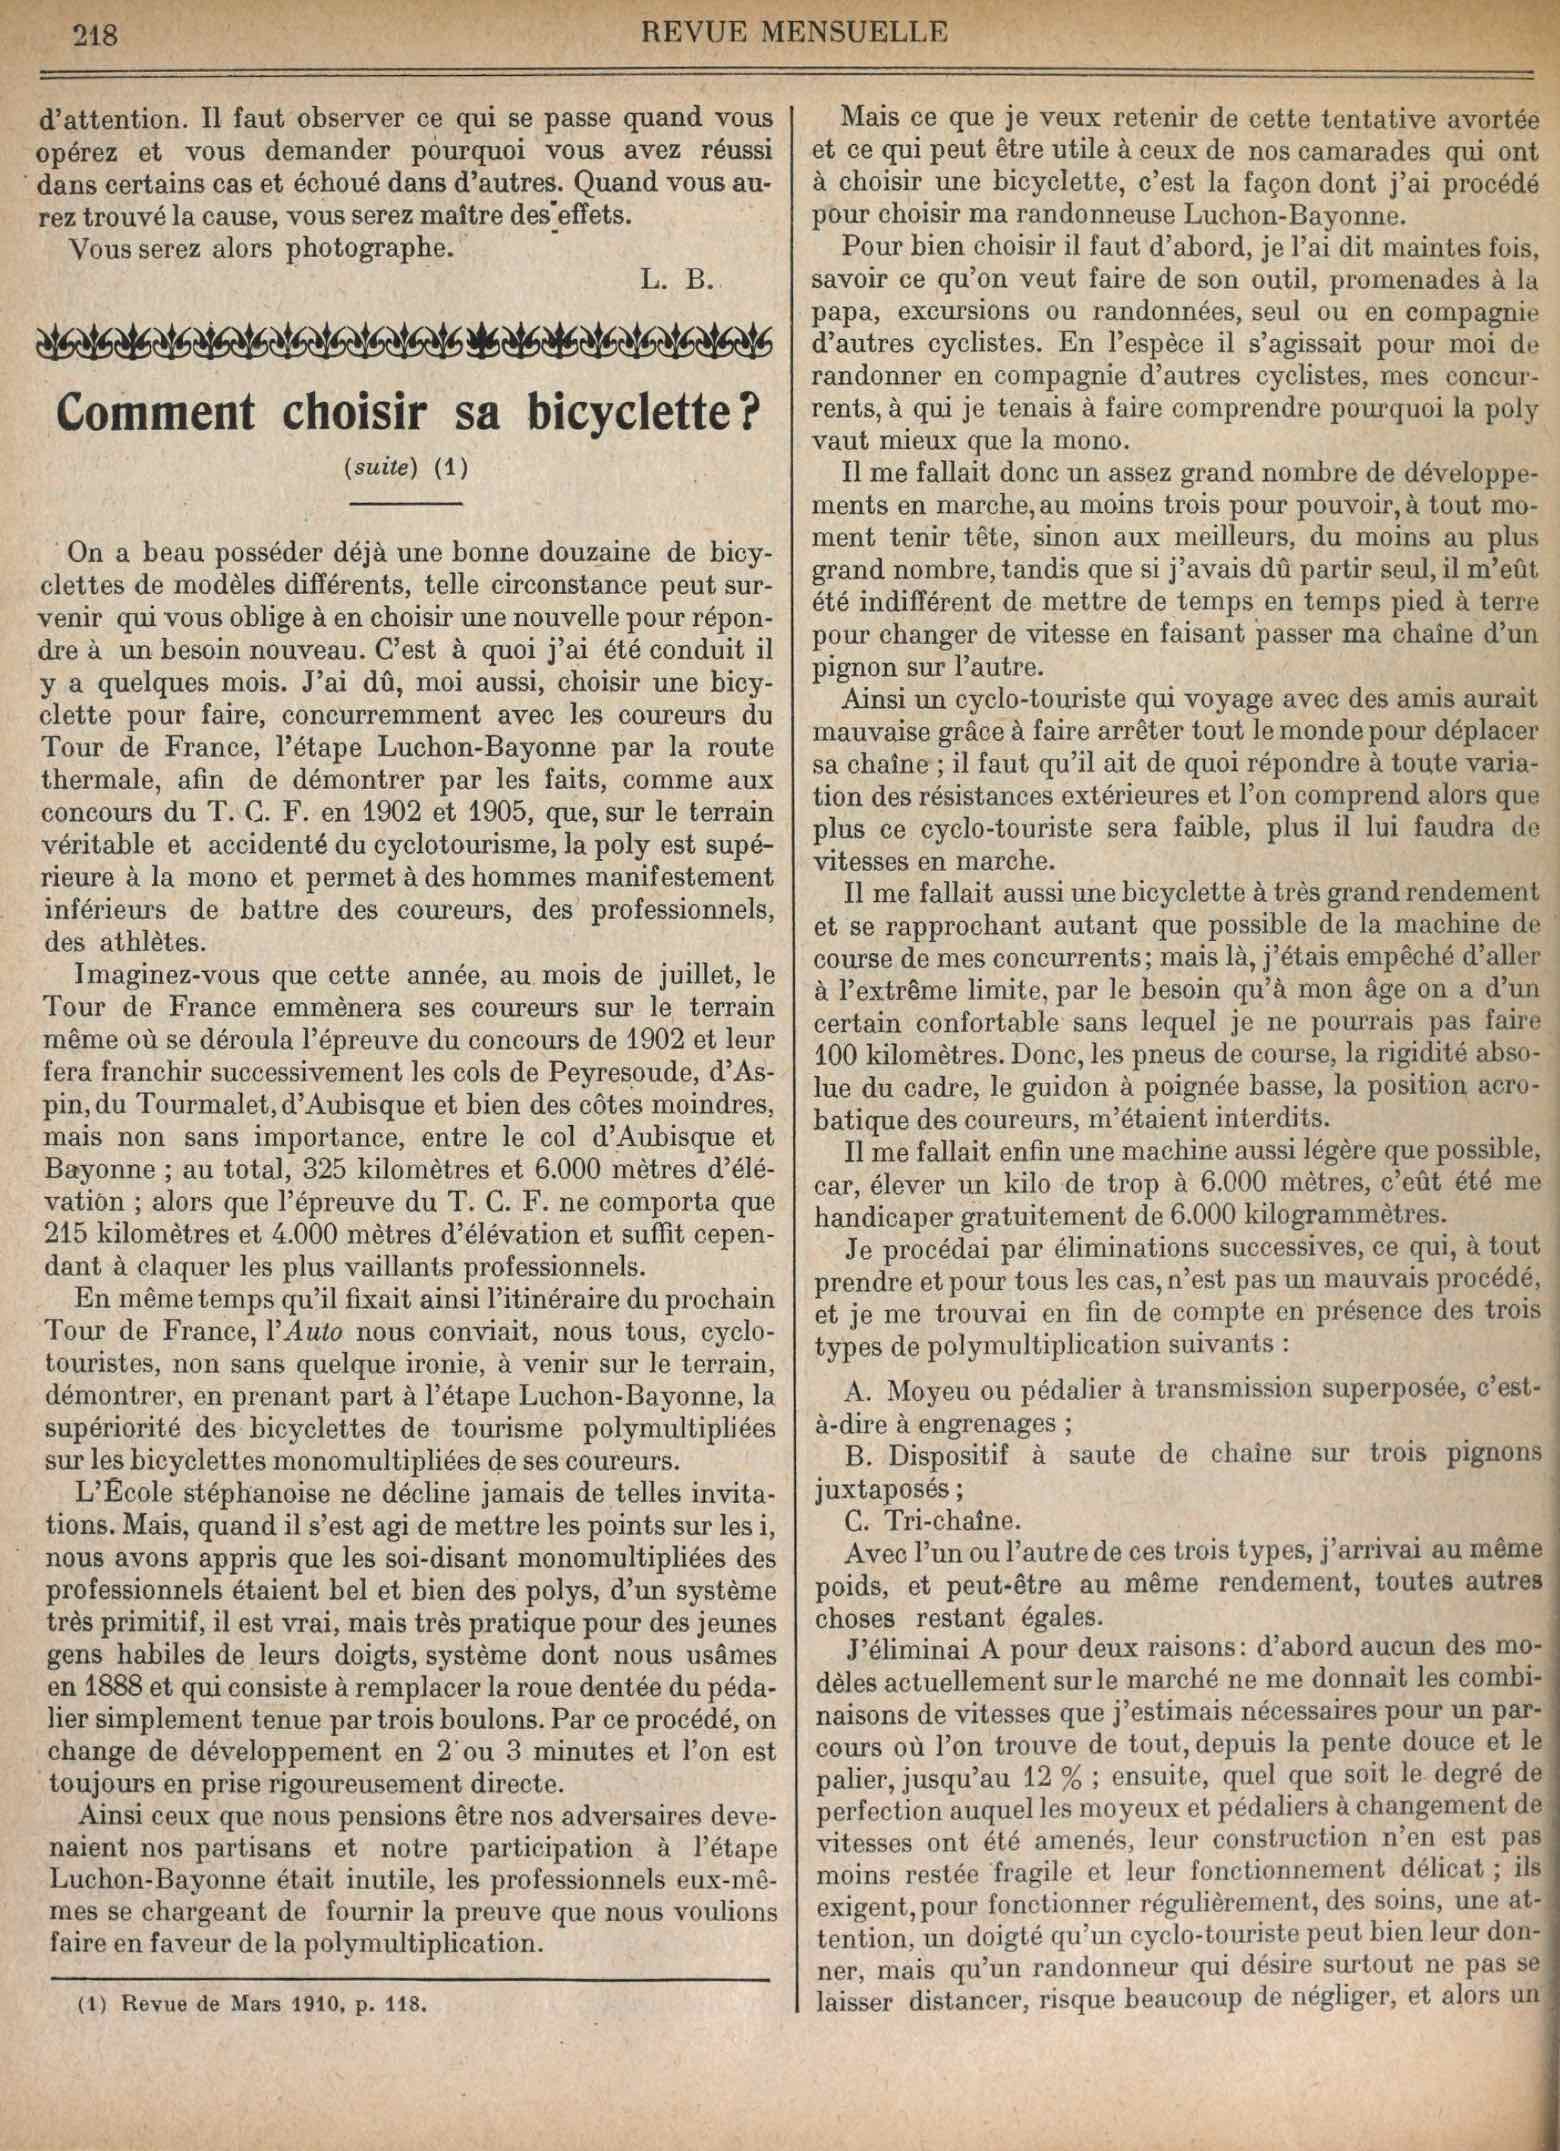 T.C.F. Revue Mensuelle May 1910 - Comment choisir sa bicyclette? (part IV) scan 1 main image